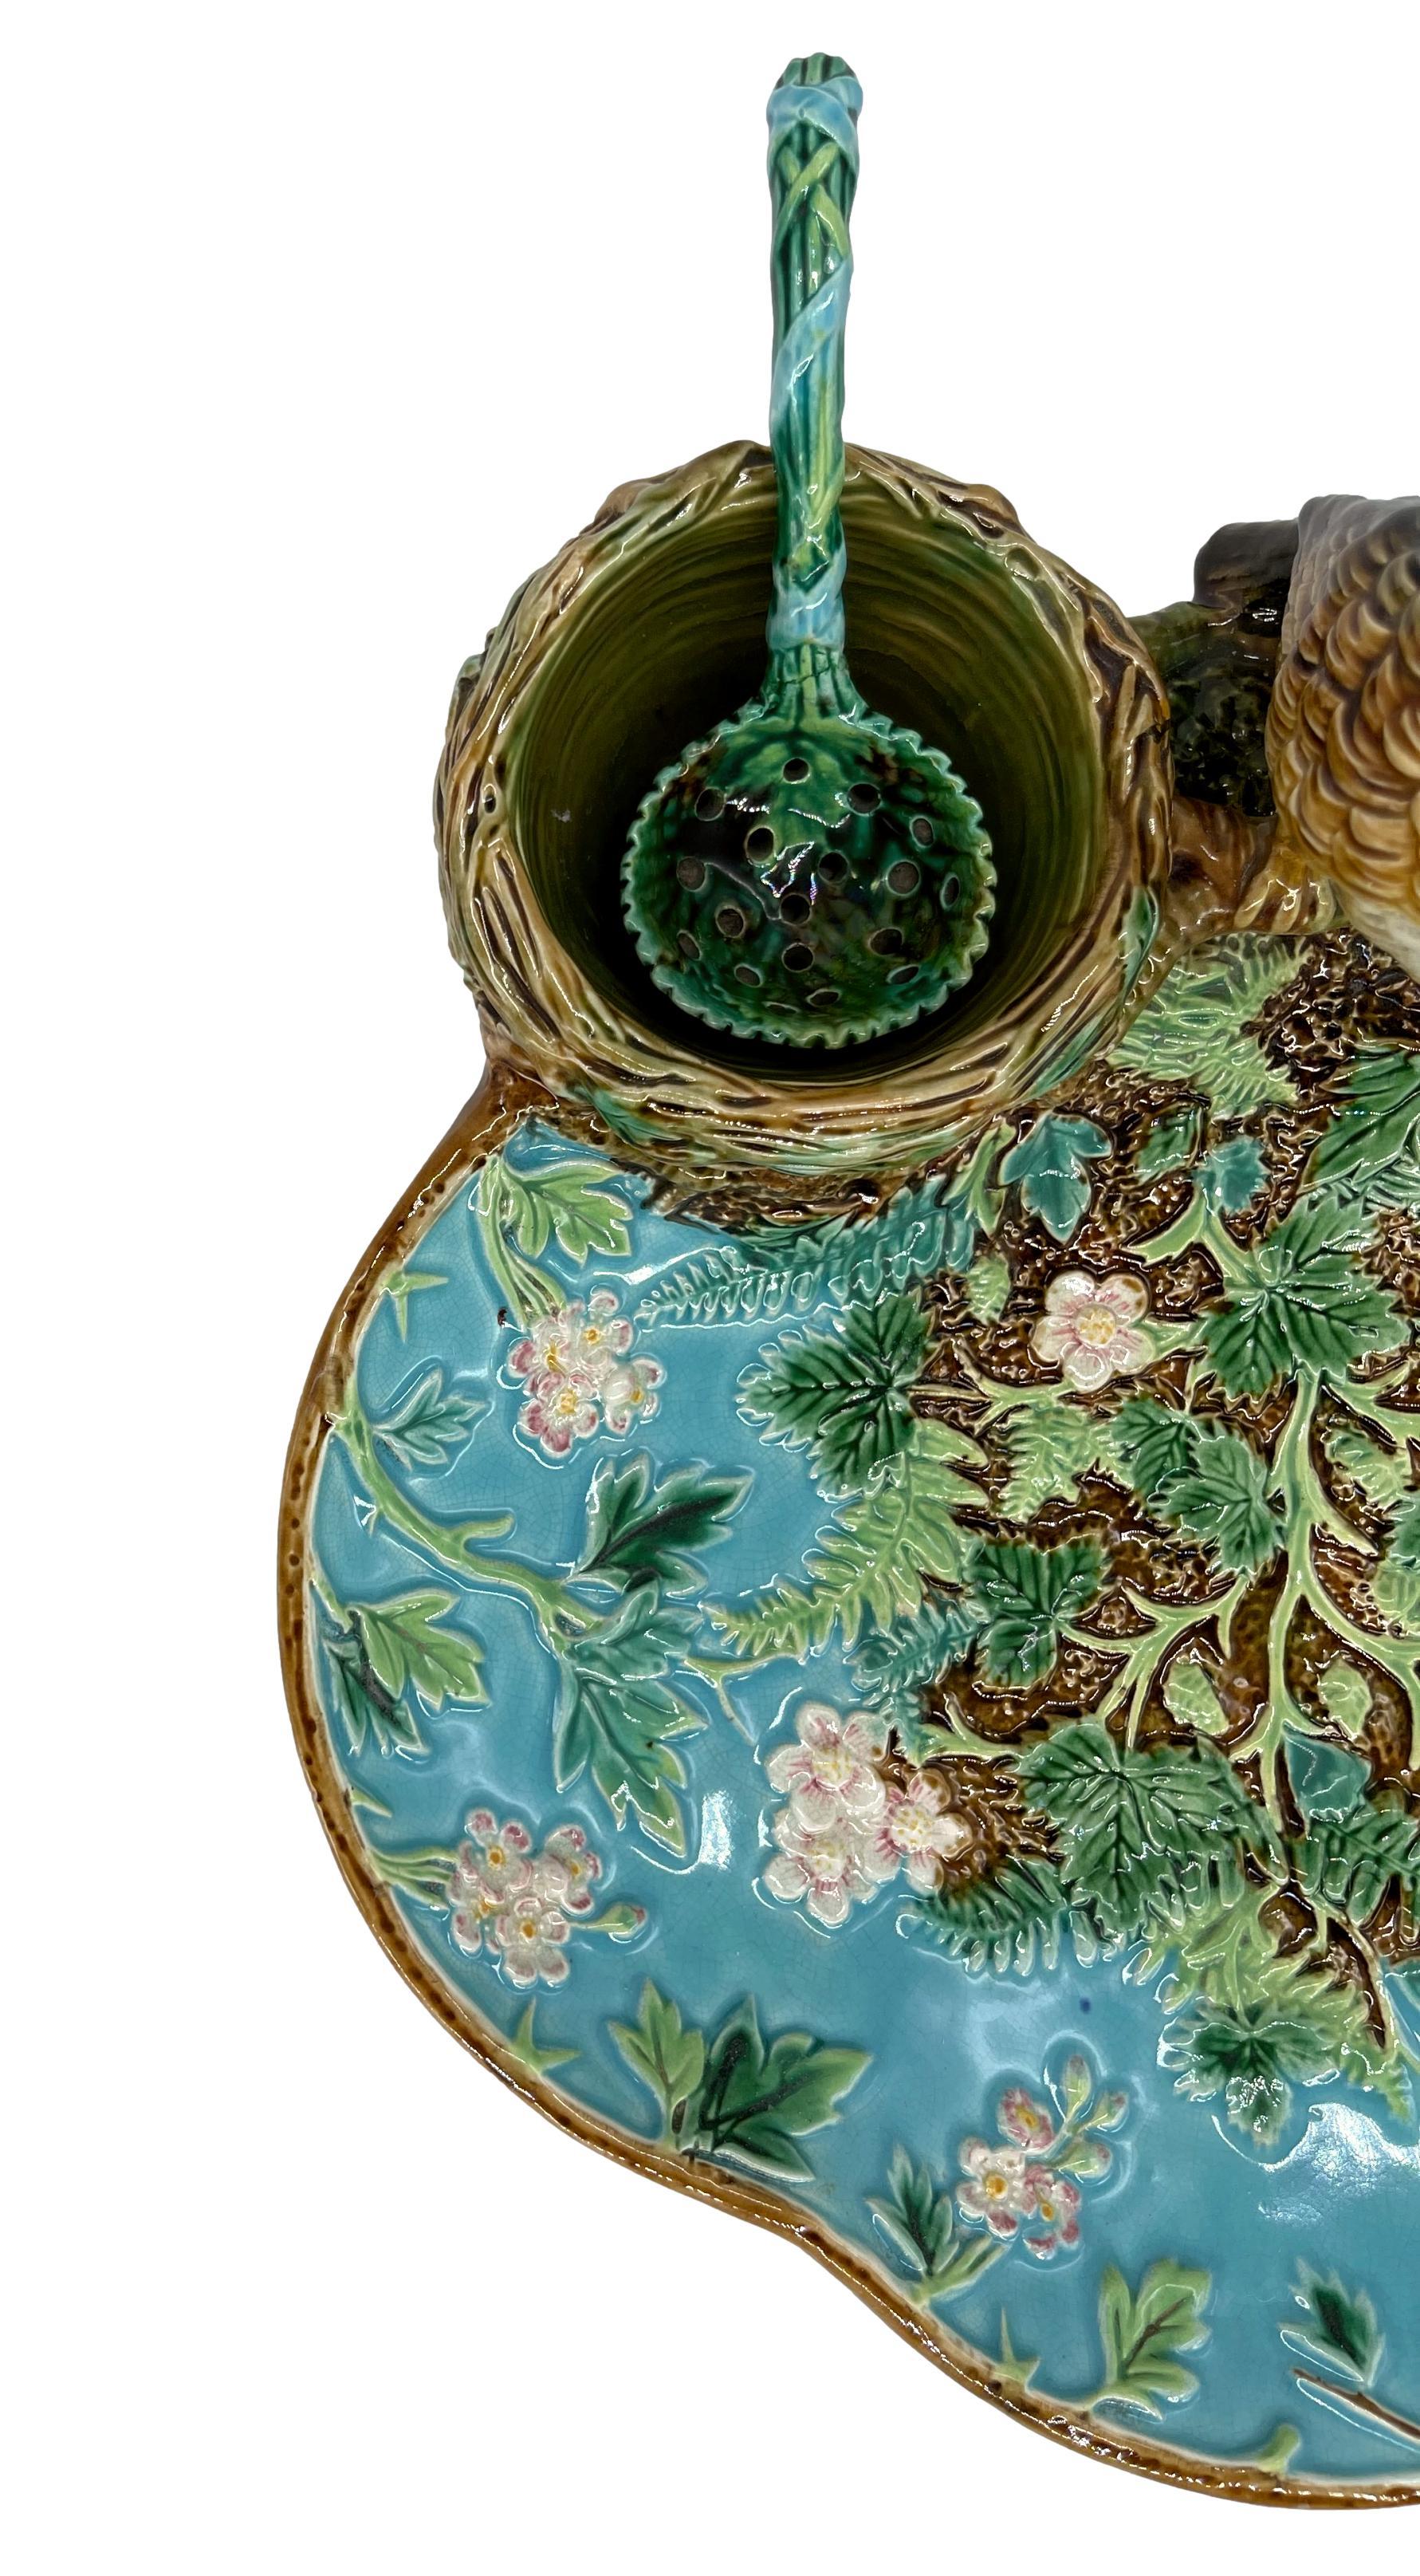 George Jones Majolica Strawberry Server, ca. 1870, Design Number 2559, the trefoil dish naturalistically modelled with blossoming strawberry plants and ferns on a turquoise and rustic ground, surmounted with a life-size thrush perched on simulated